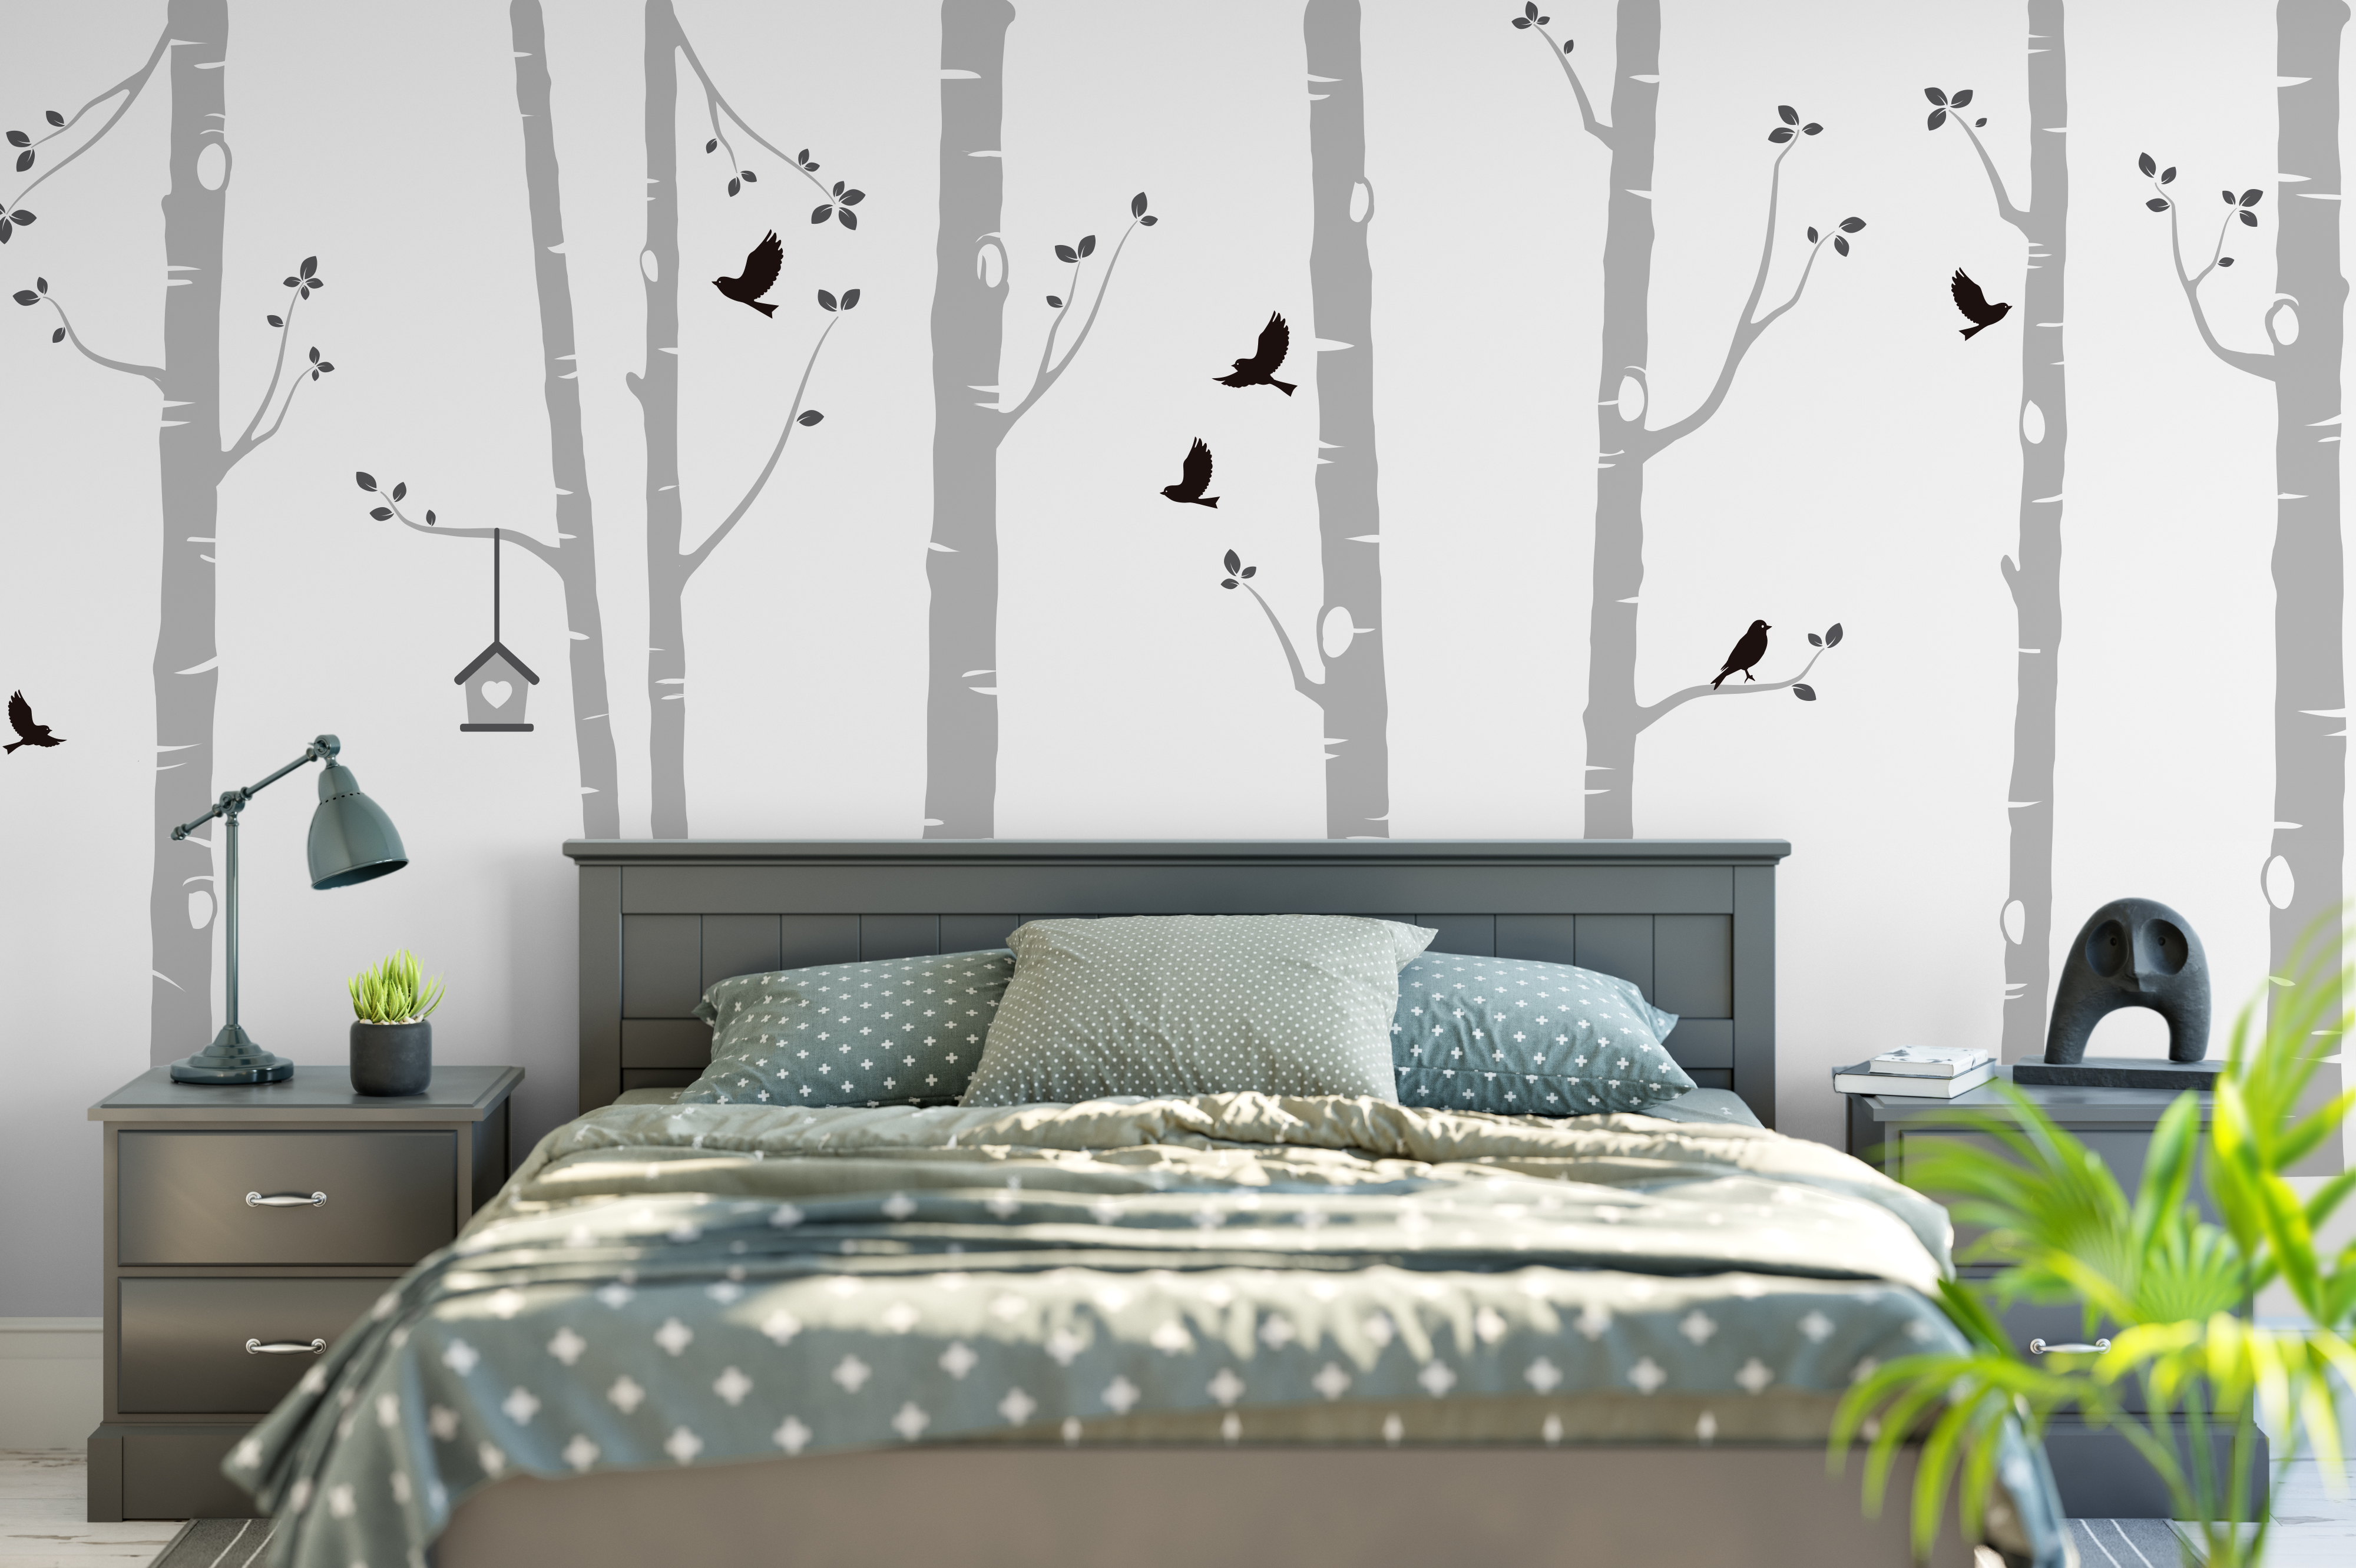 Birch Tree Wall Stickers In Grey - Display Travel Photos On Wall - HD Wallpaper 